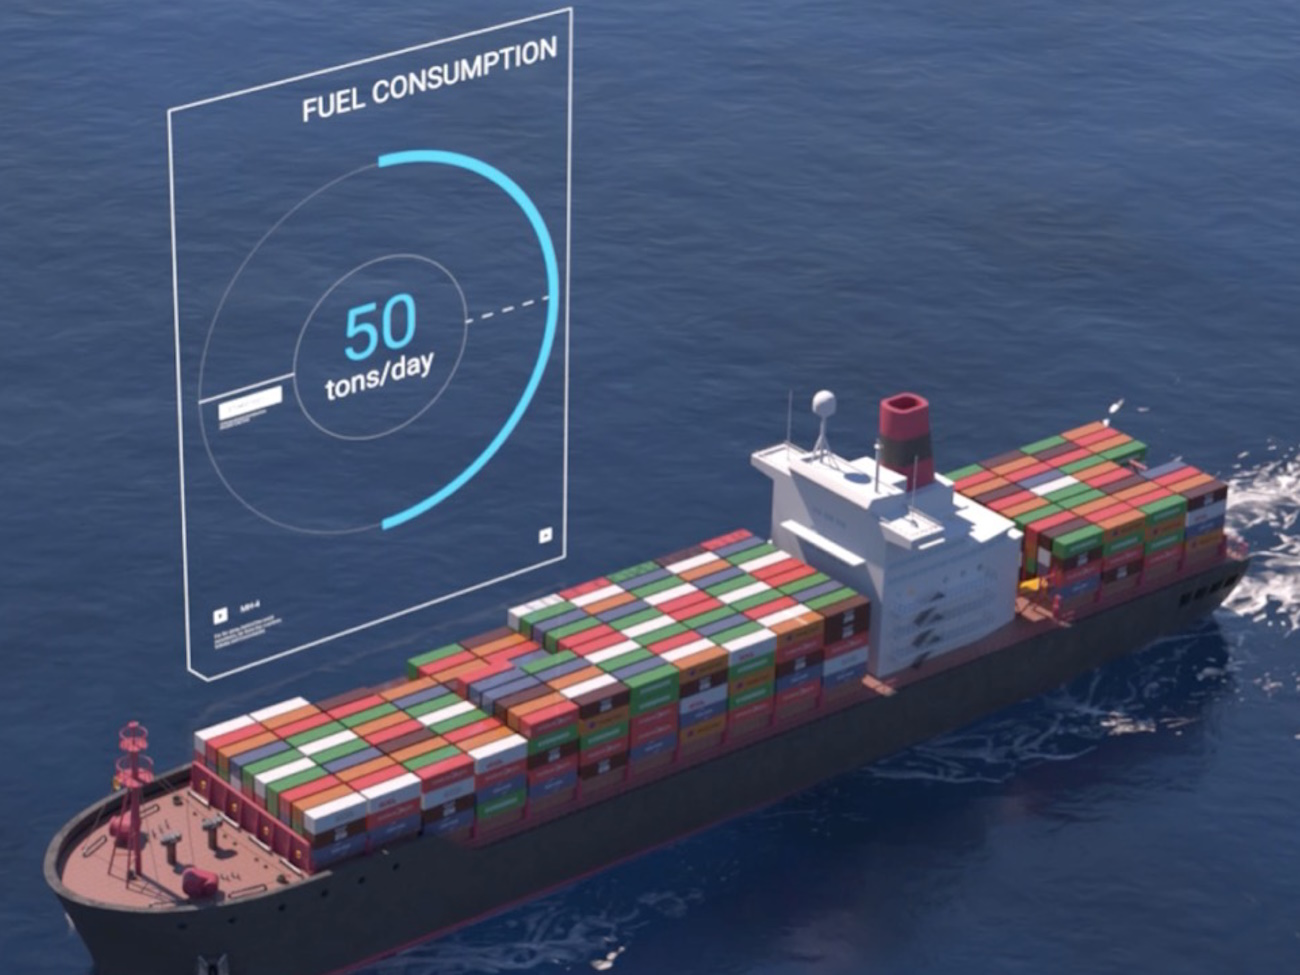 Cargo ship with fuel useage tracking